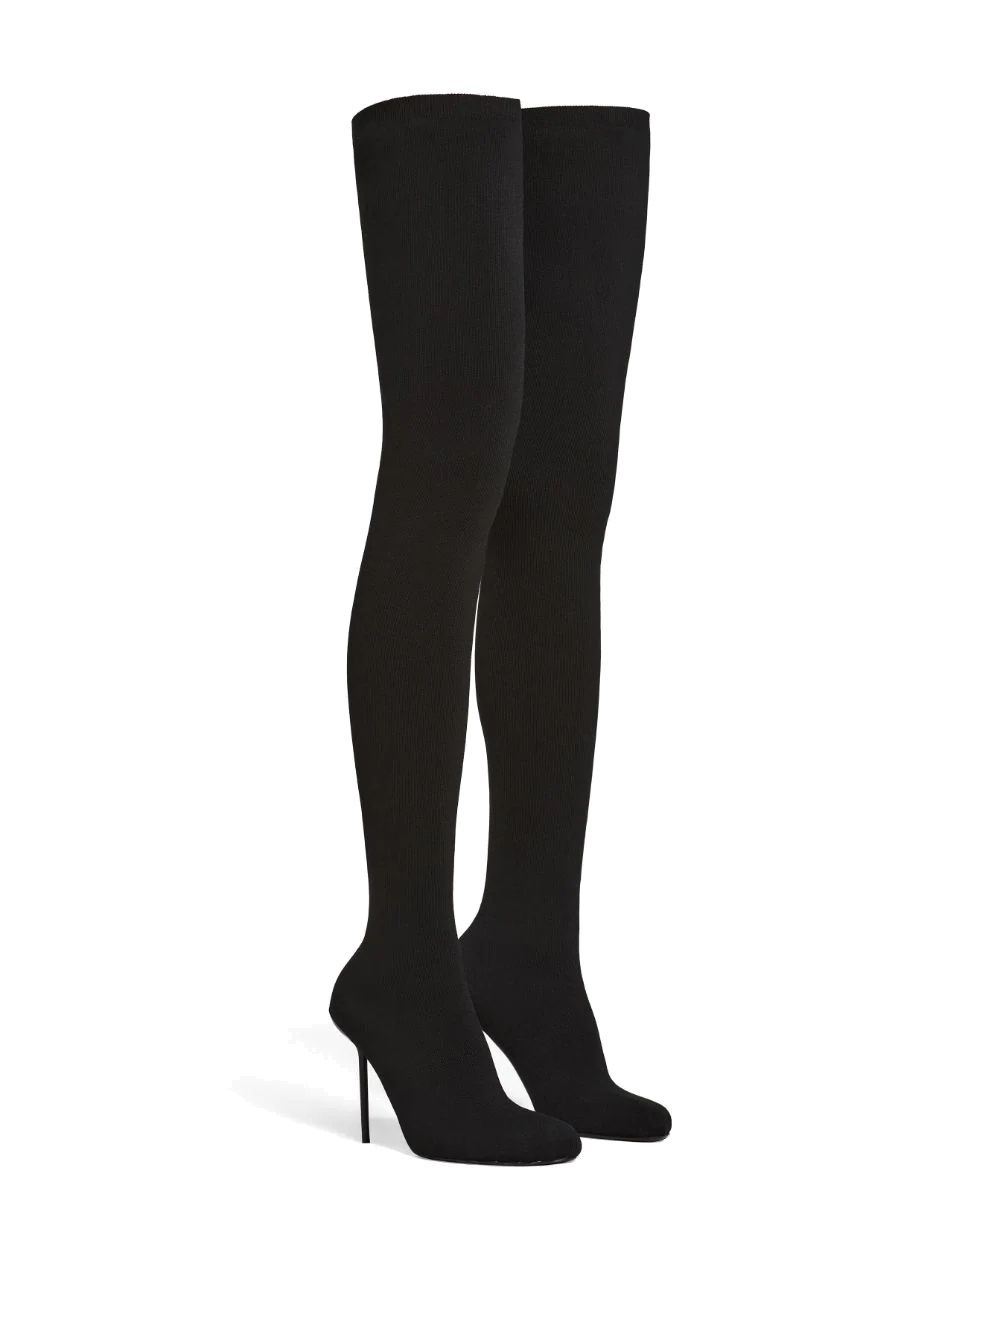 Anatomic Over The Knee Boots 110 mm